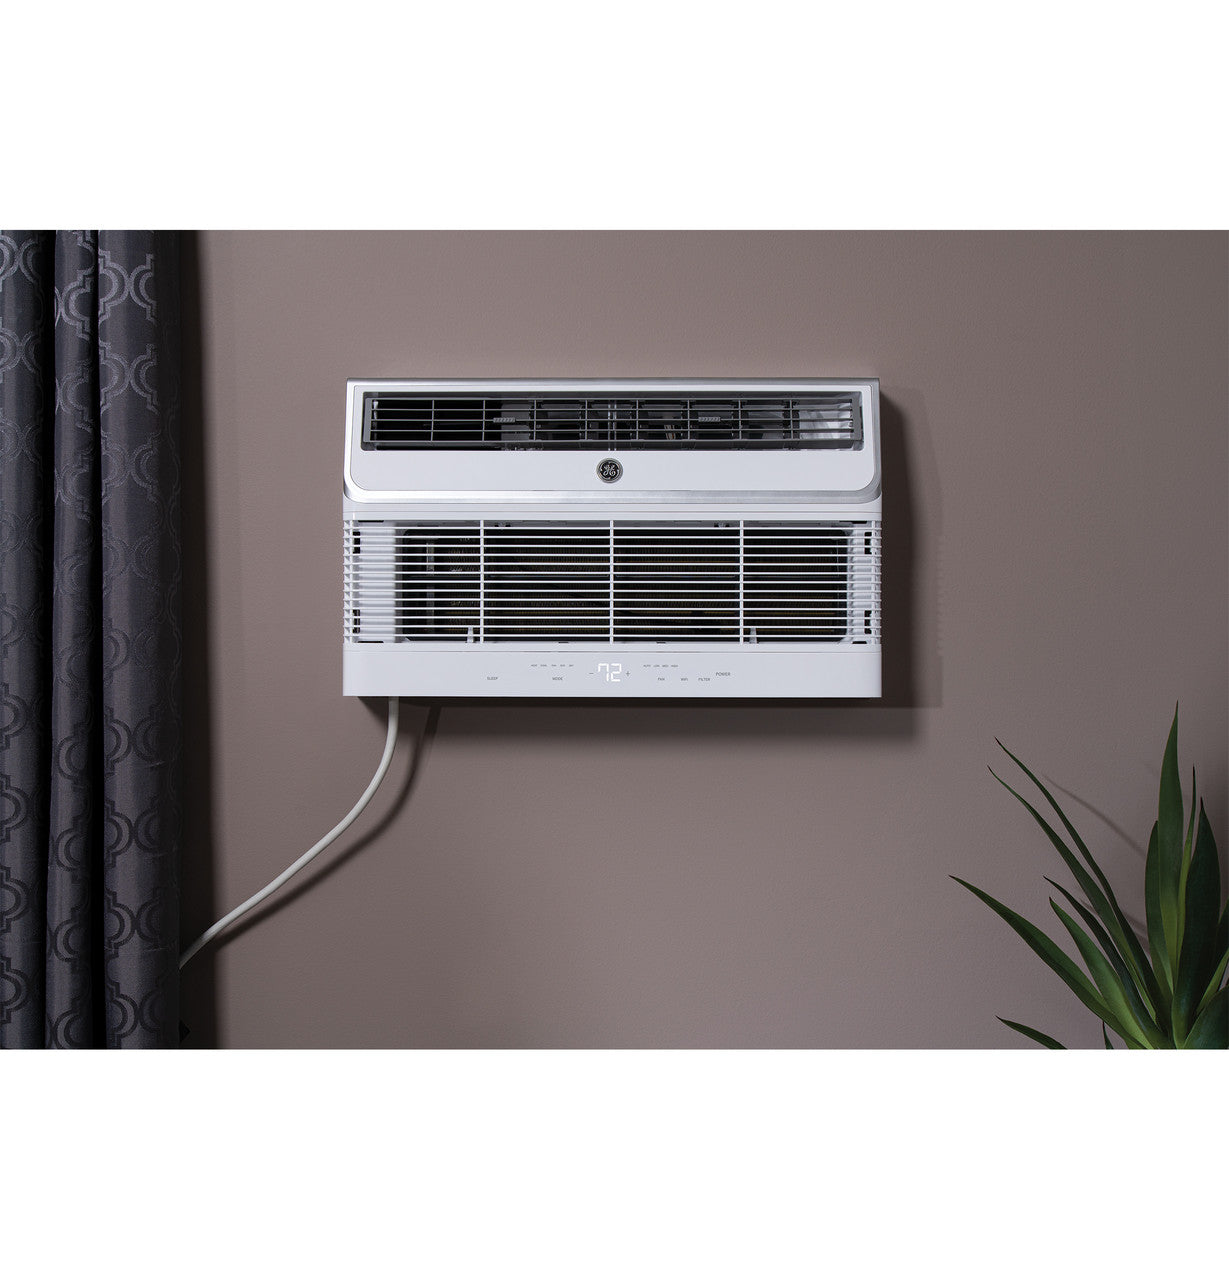 GE 12,000 BTU 208/230 Volt Through-the-Wall Air Conditioner with Electric Heat - AJEM12DWJ